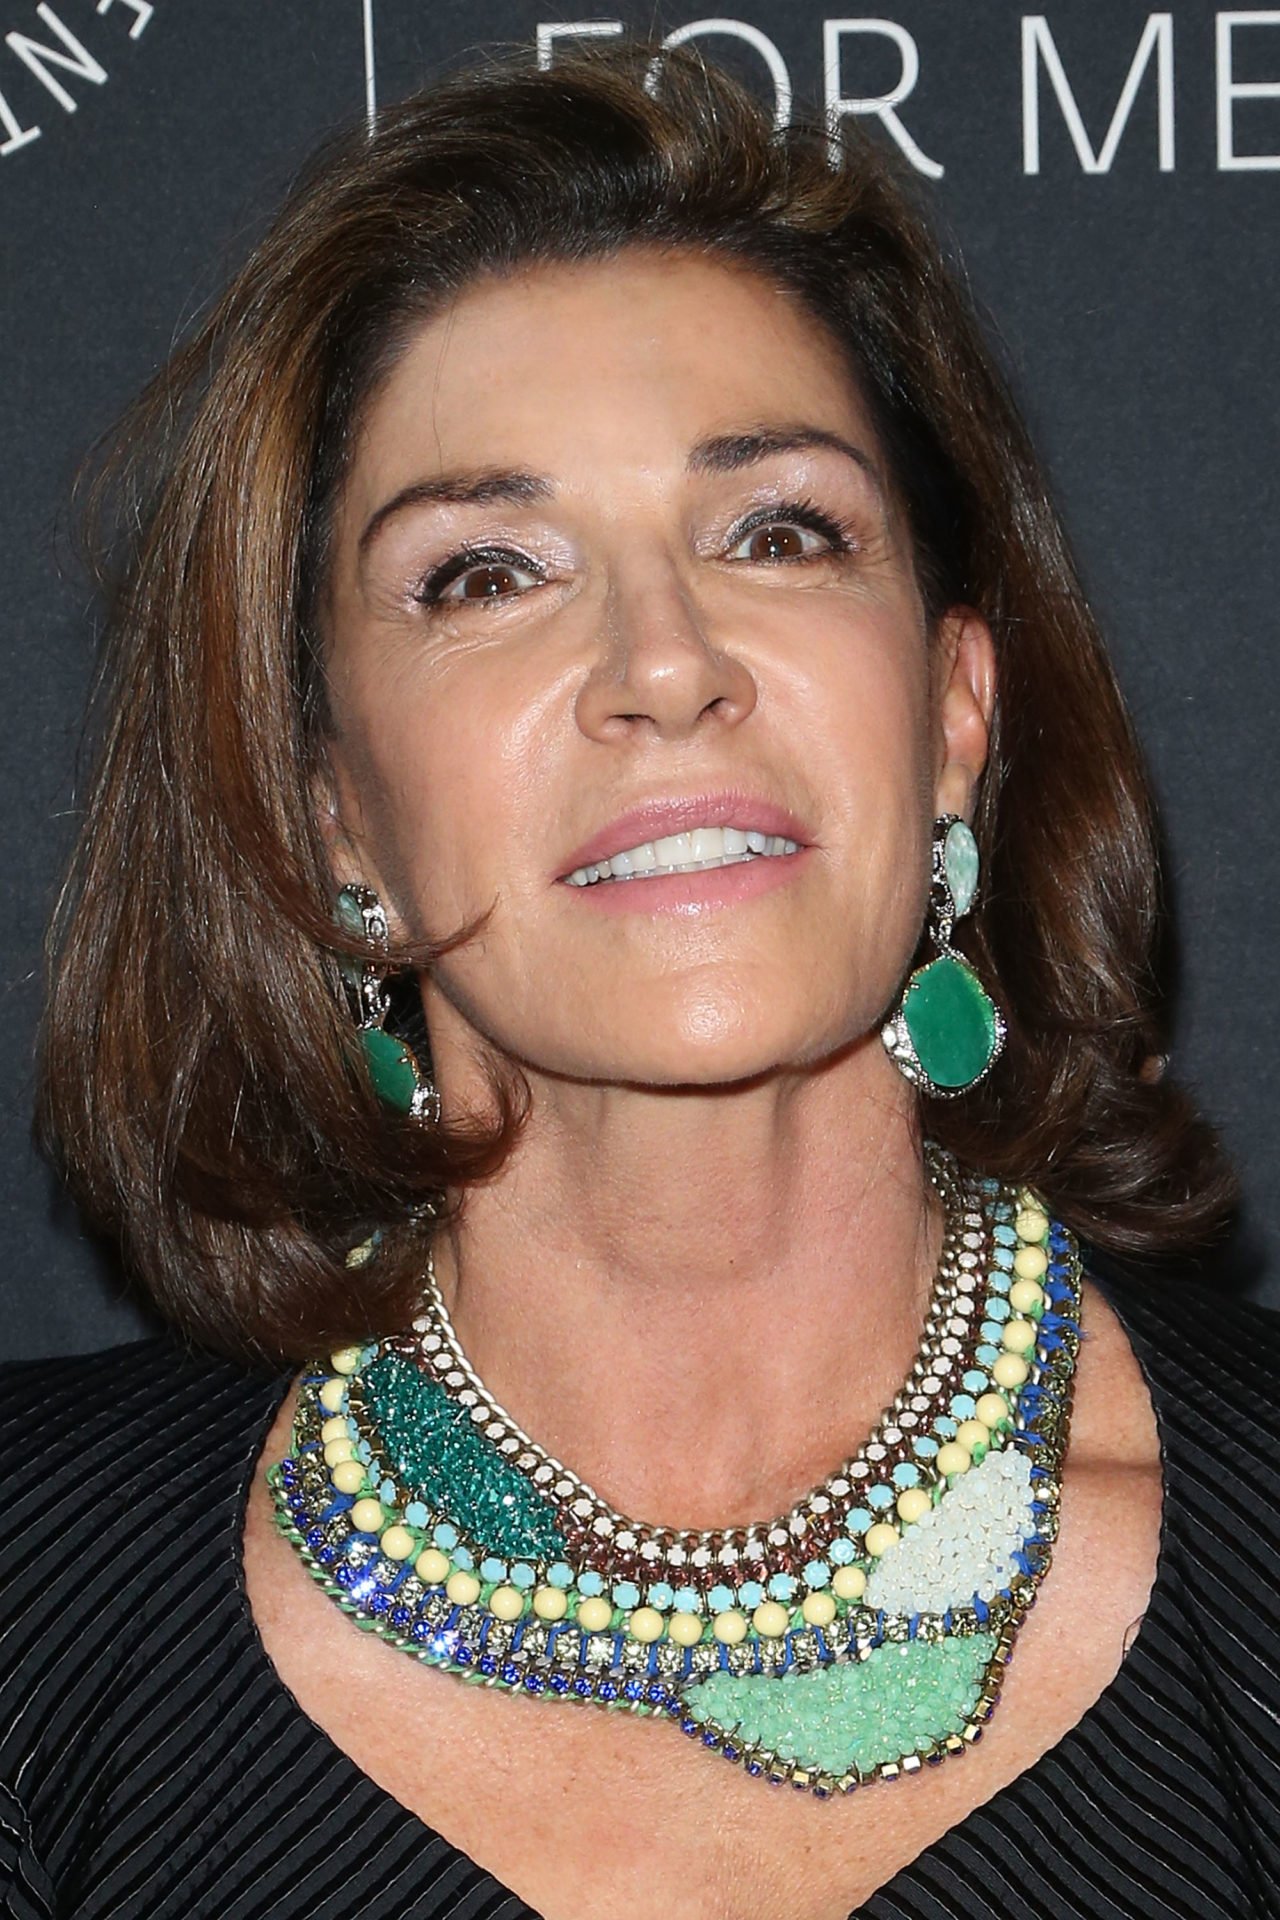 What is Hilary Farr’s age in 2022? Love It Or List It returns